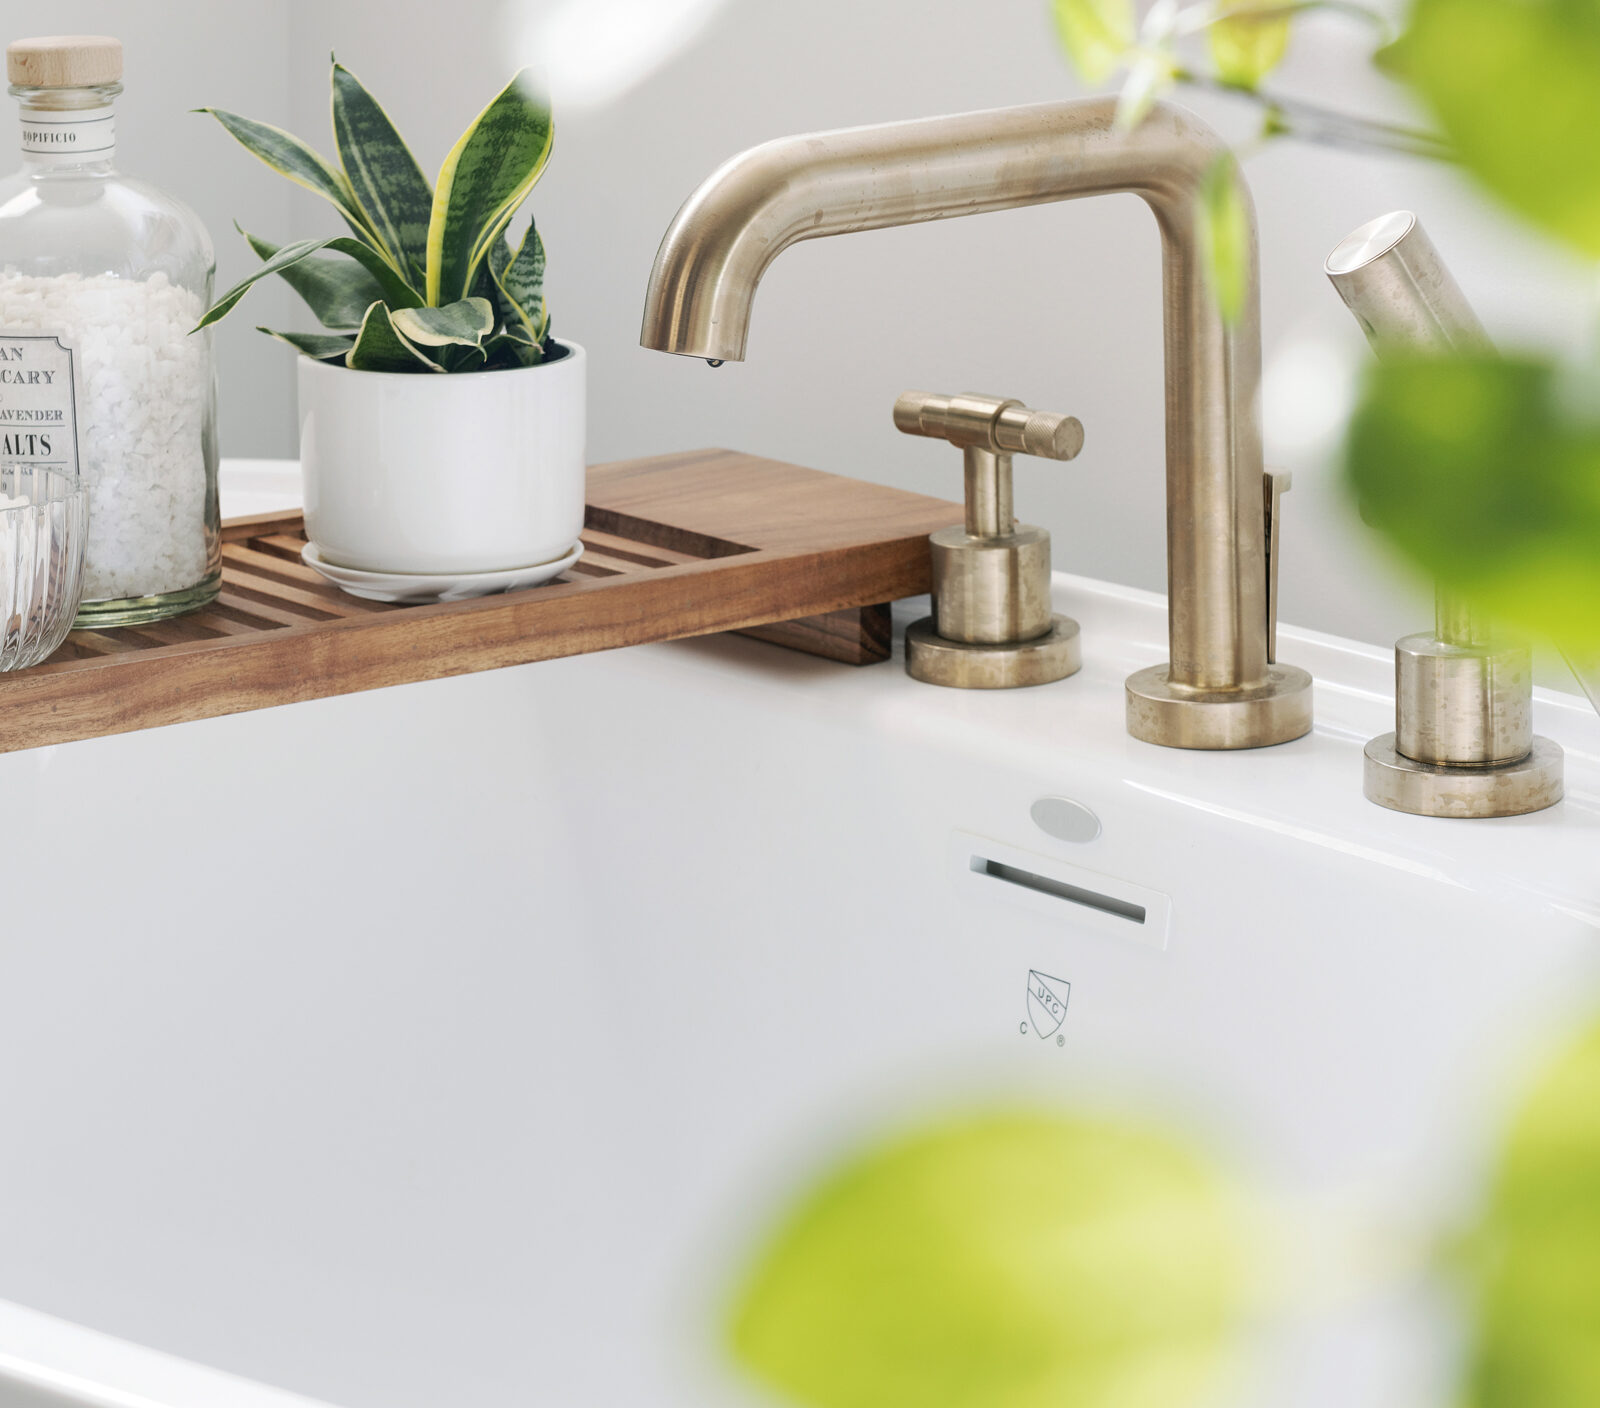 Primary Bathroom Remodel, Champagne Gold Faucet, Tub | construction2style